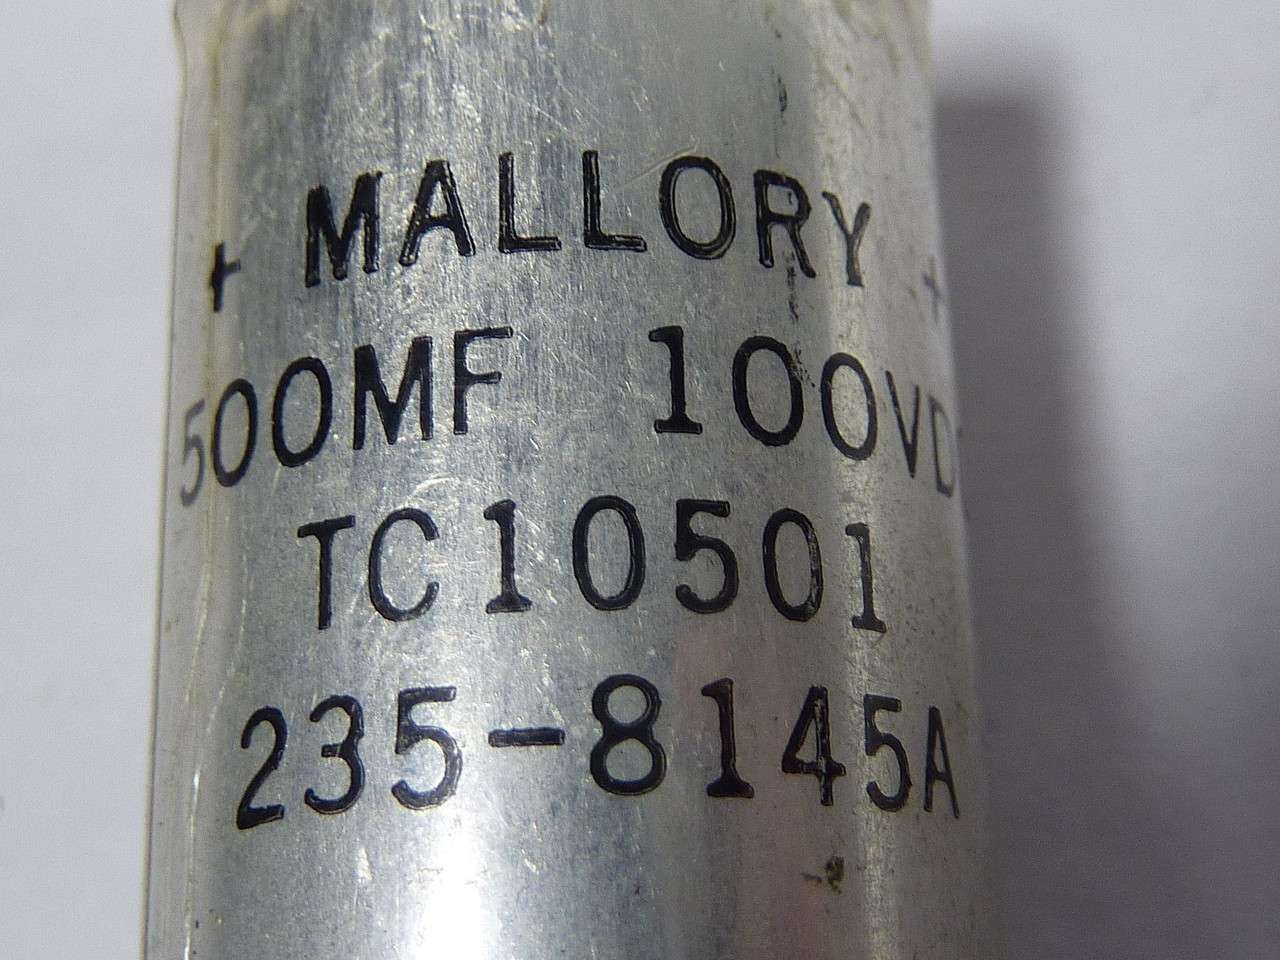 Mallory TC10501 Electrolytic Capacitor 500mfd 100VDC USED